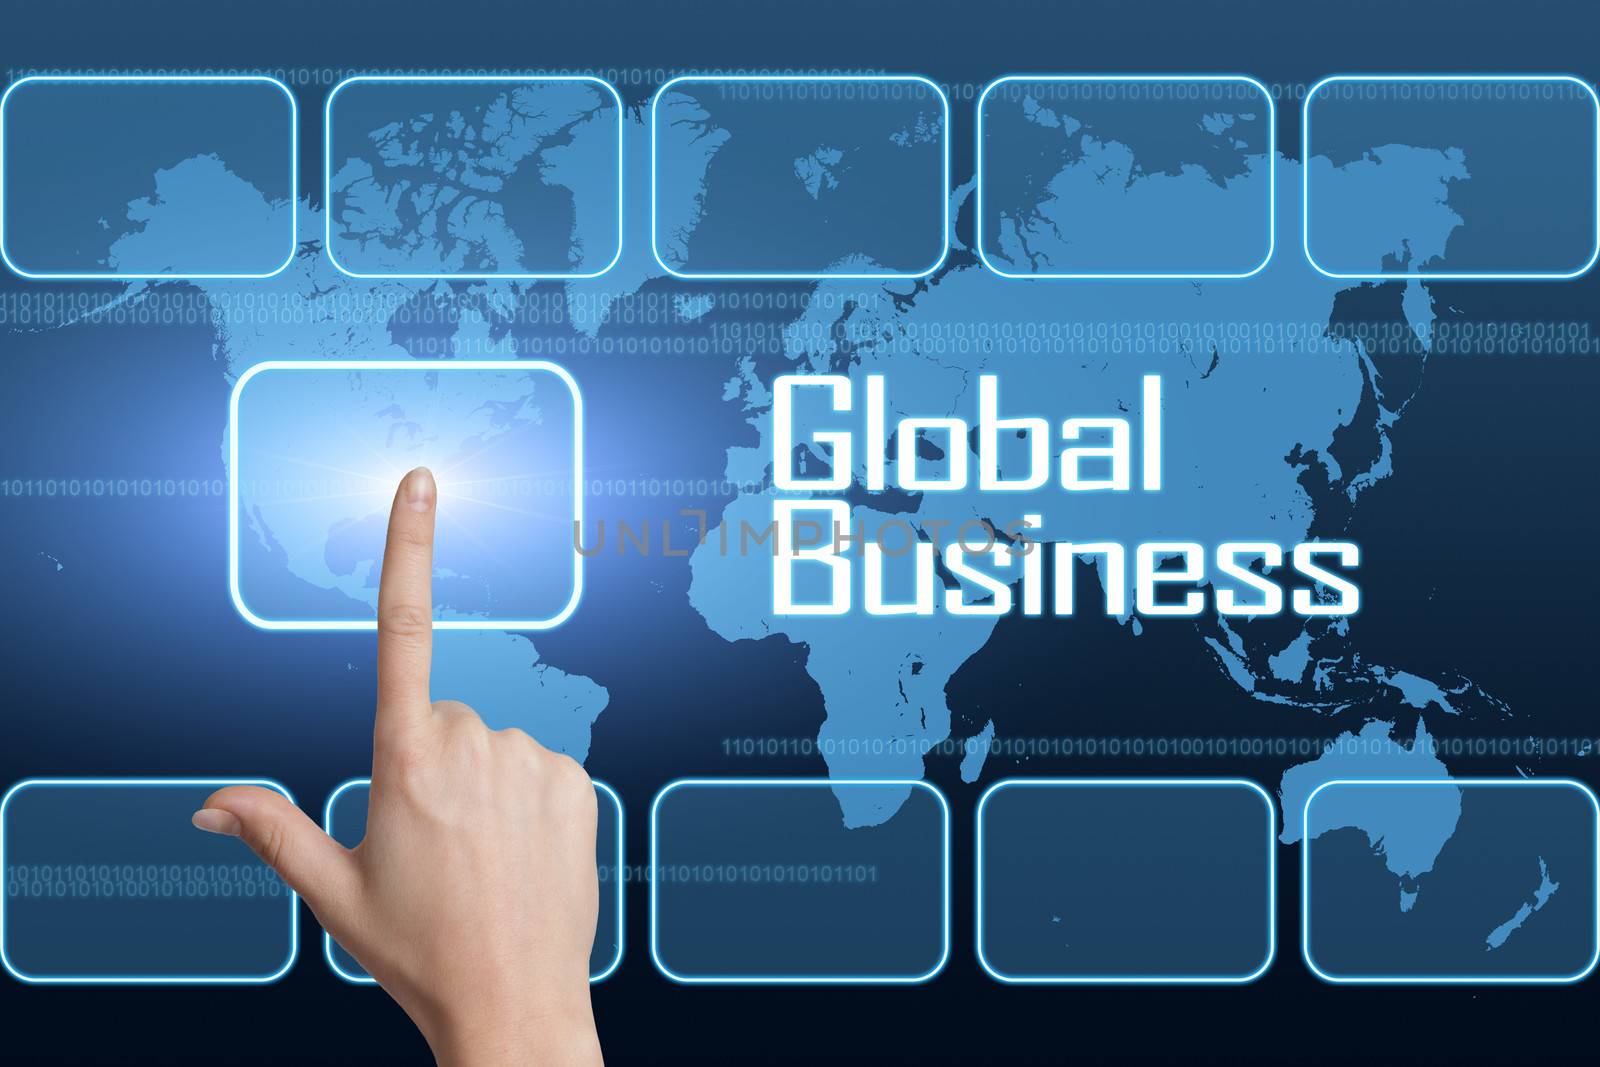 Global Business concept with interface and world map on blue background